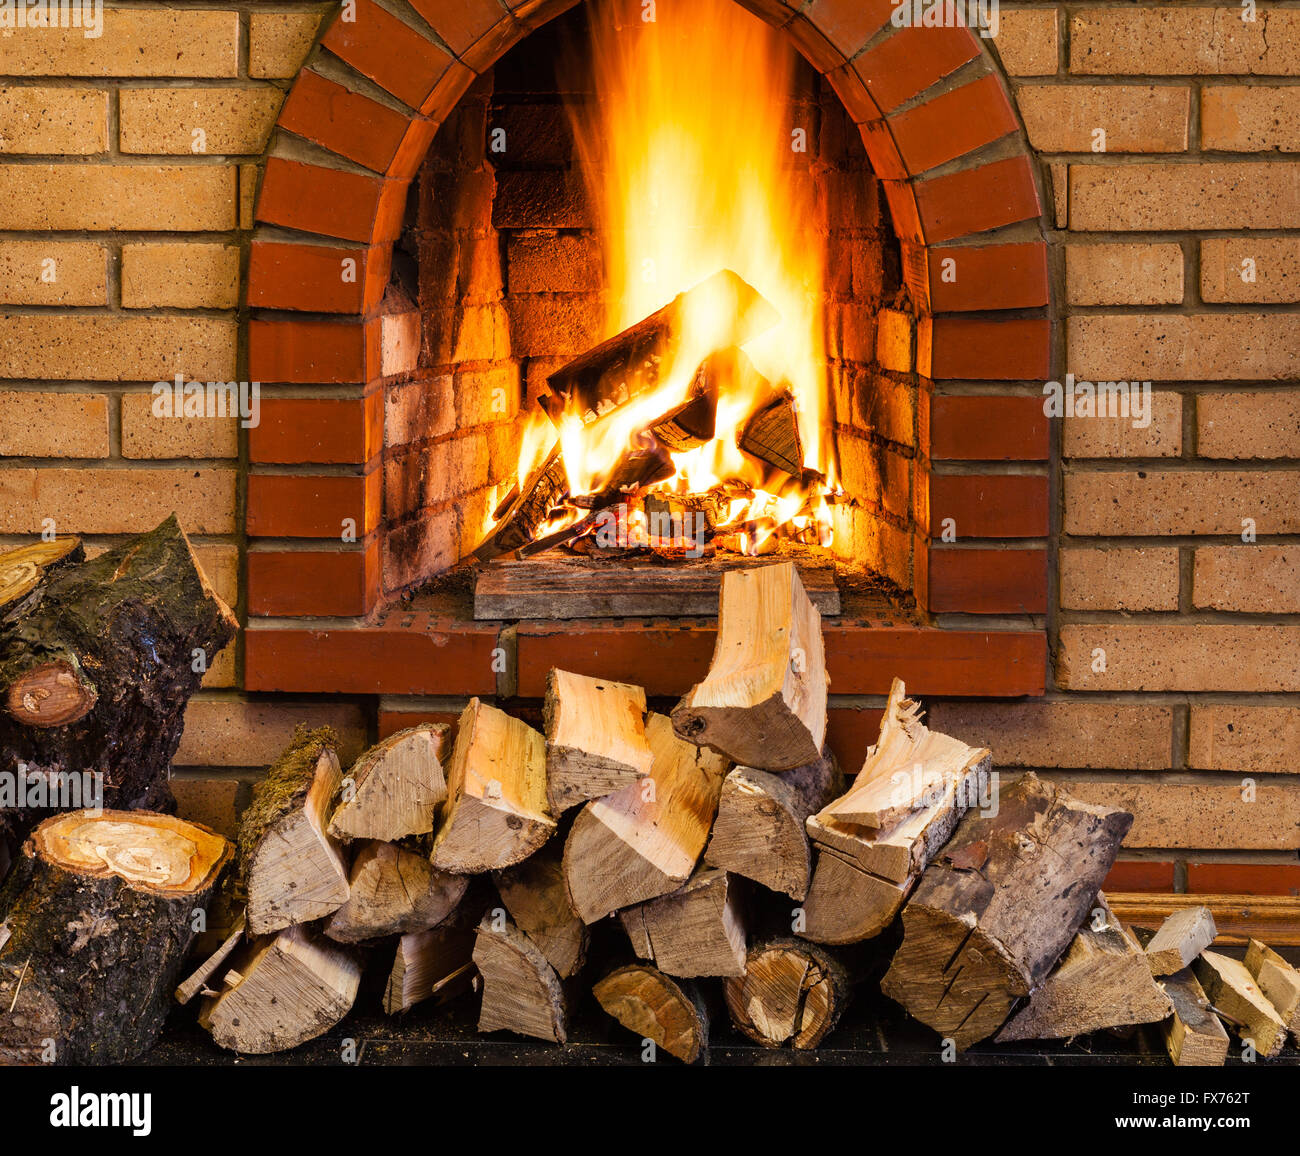 pile of firewood and fire in indoor brick fireplace in country cottage Stock Photo